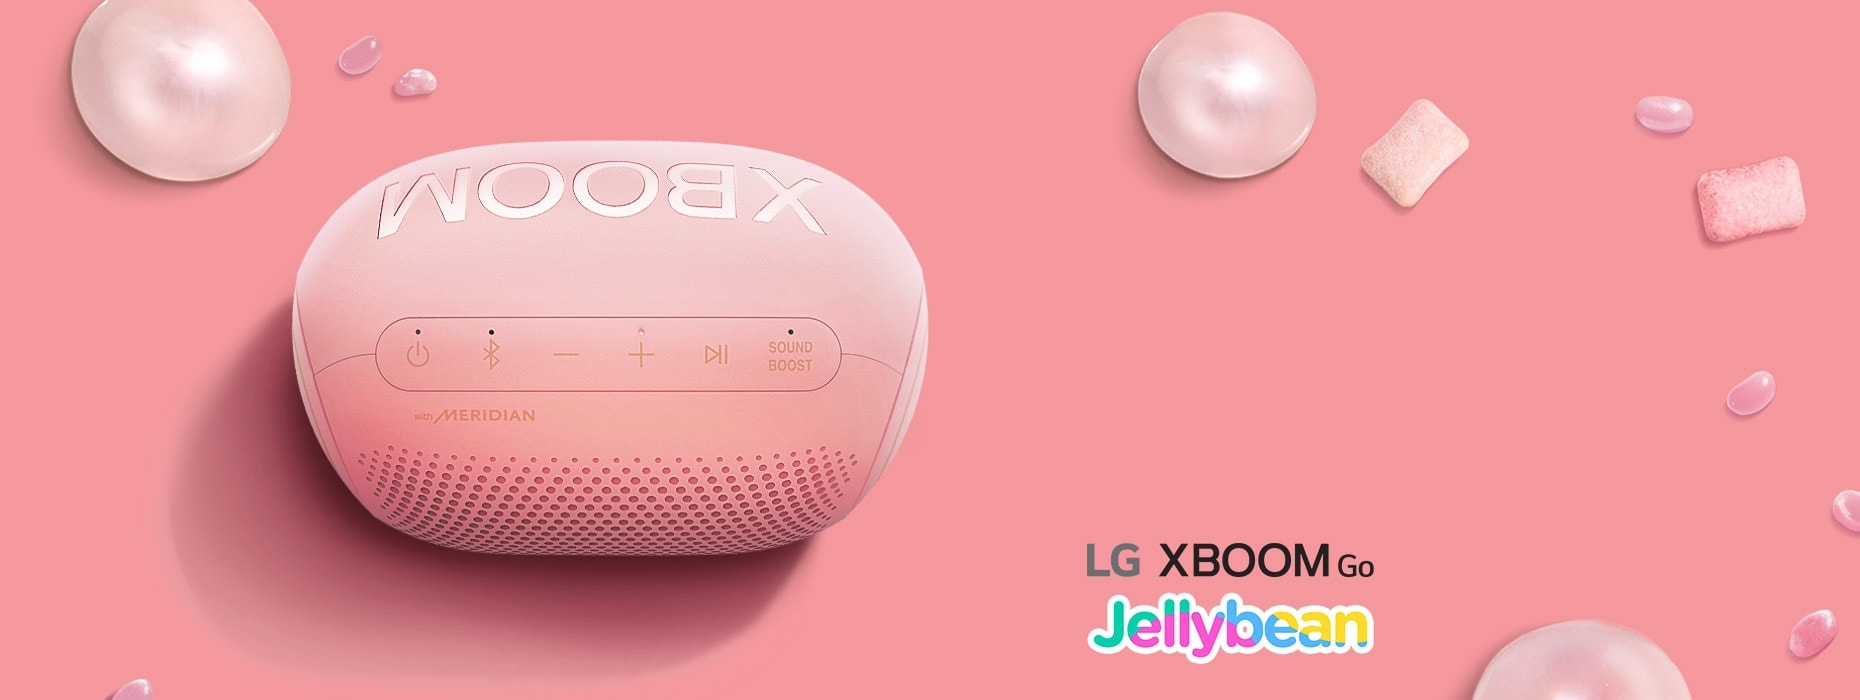 PL2 Jelly Bean is displayed with pink background, pink gums, and pink jelly beans.